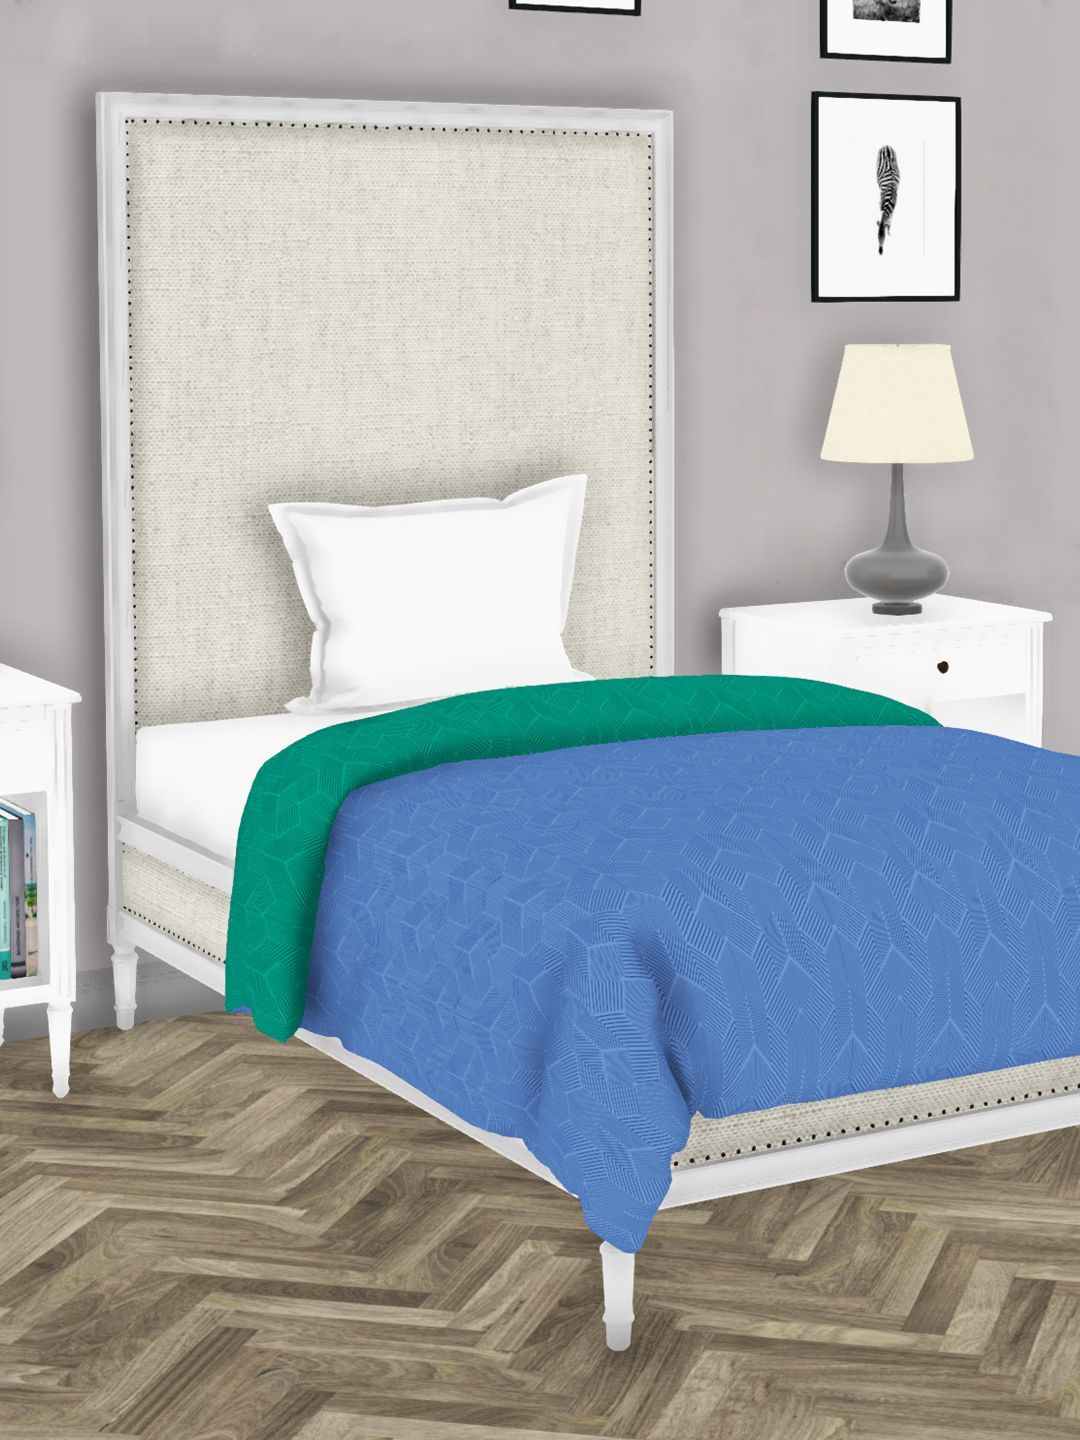 BIANCA Green & Blue Geometric AC Room 150 GSM Cotton Single Bed Comforter Price in India